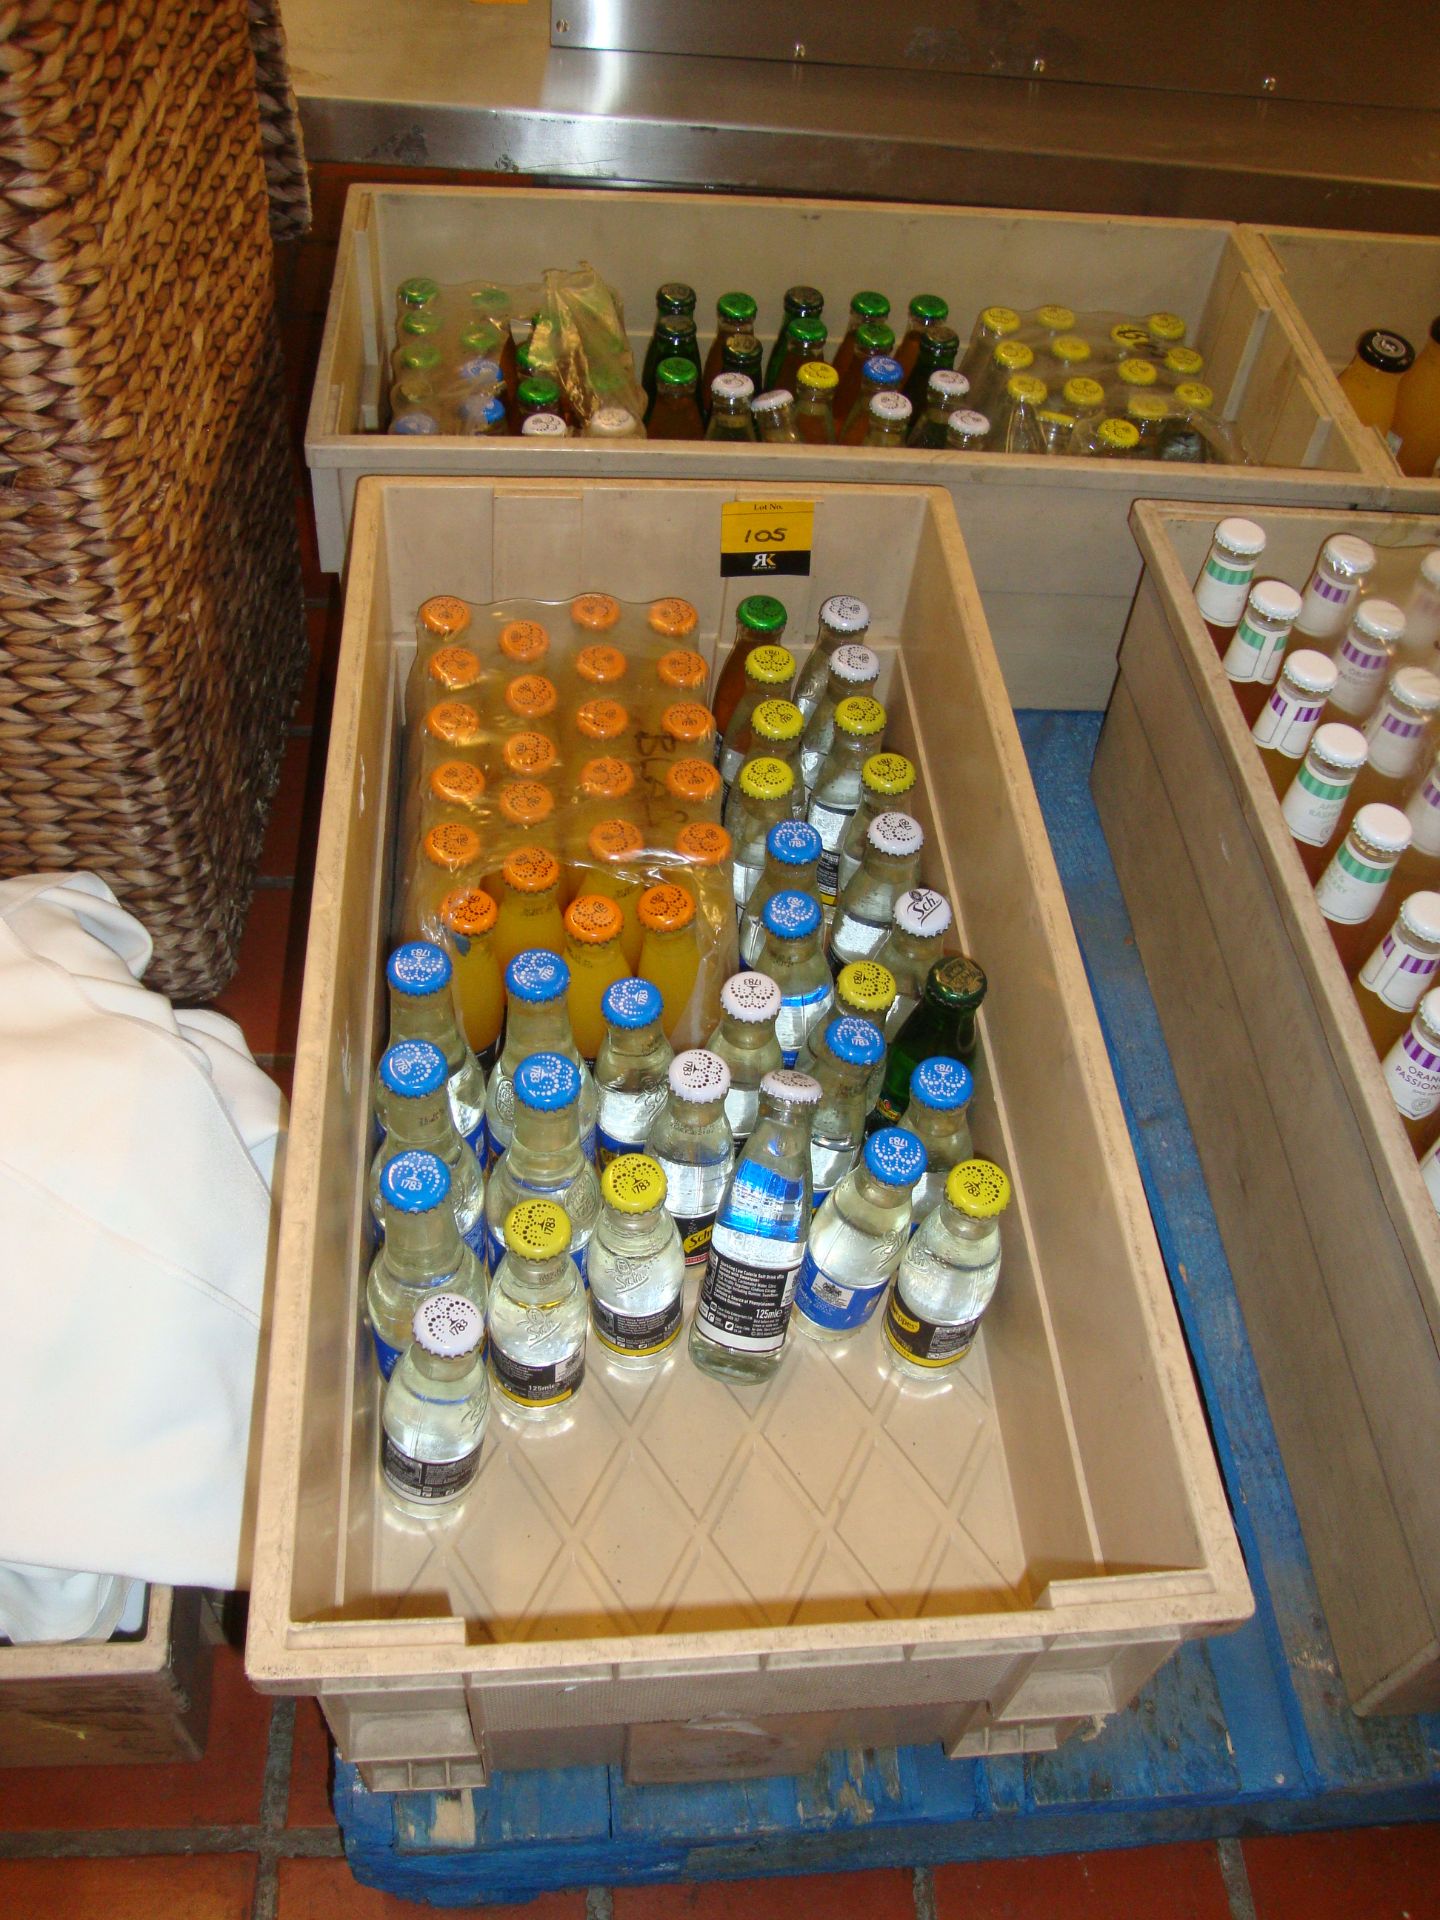 The contents of 2 crates of assorted mixers including tonic water, orange juice, etc